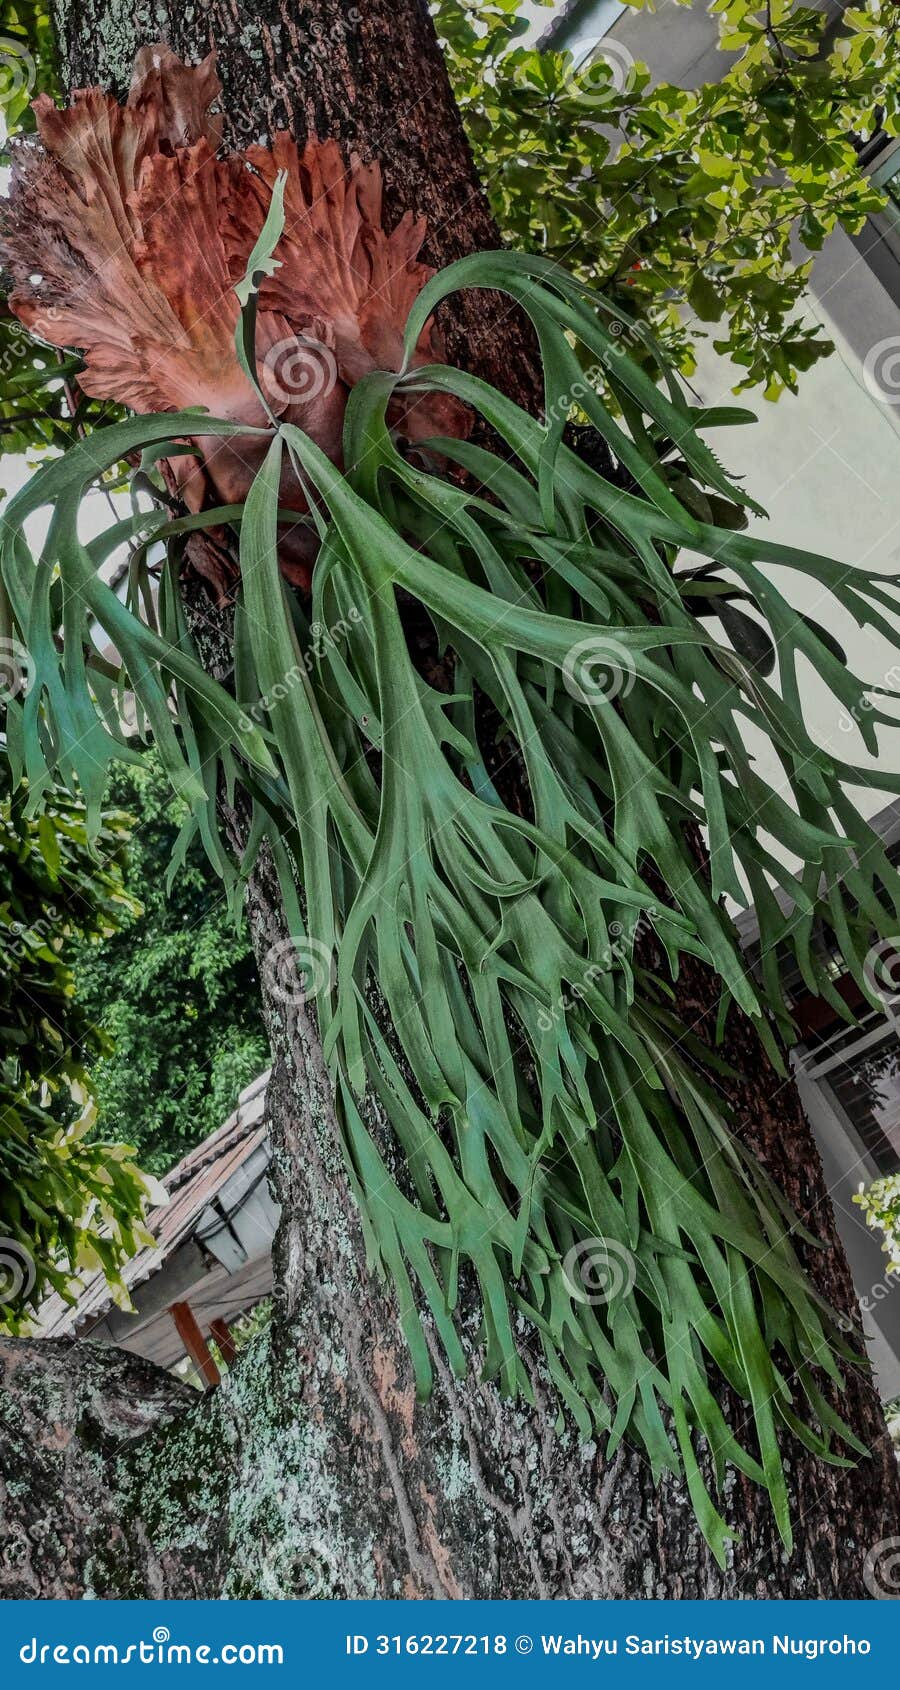 elkhorn fern or staghorn fern attached to a large tree grow abundantly and elongate